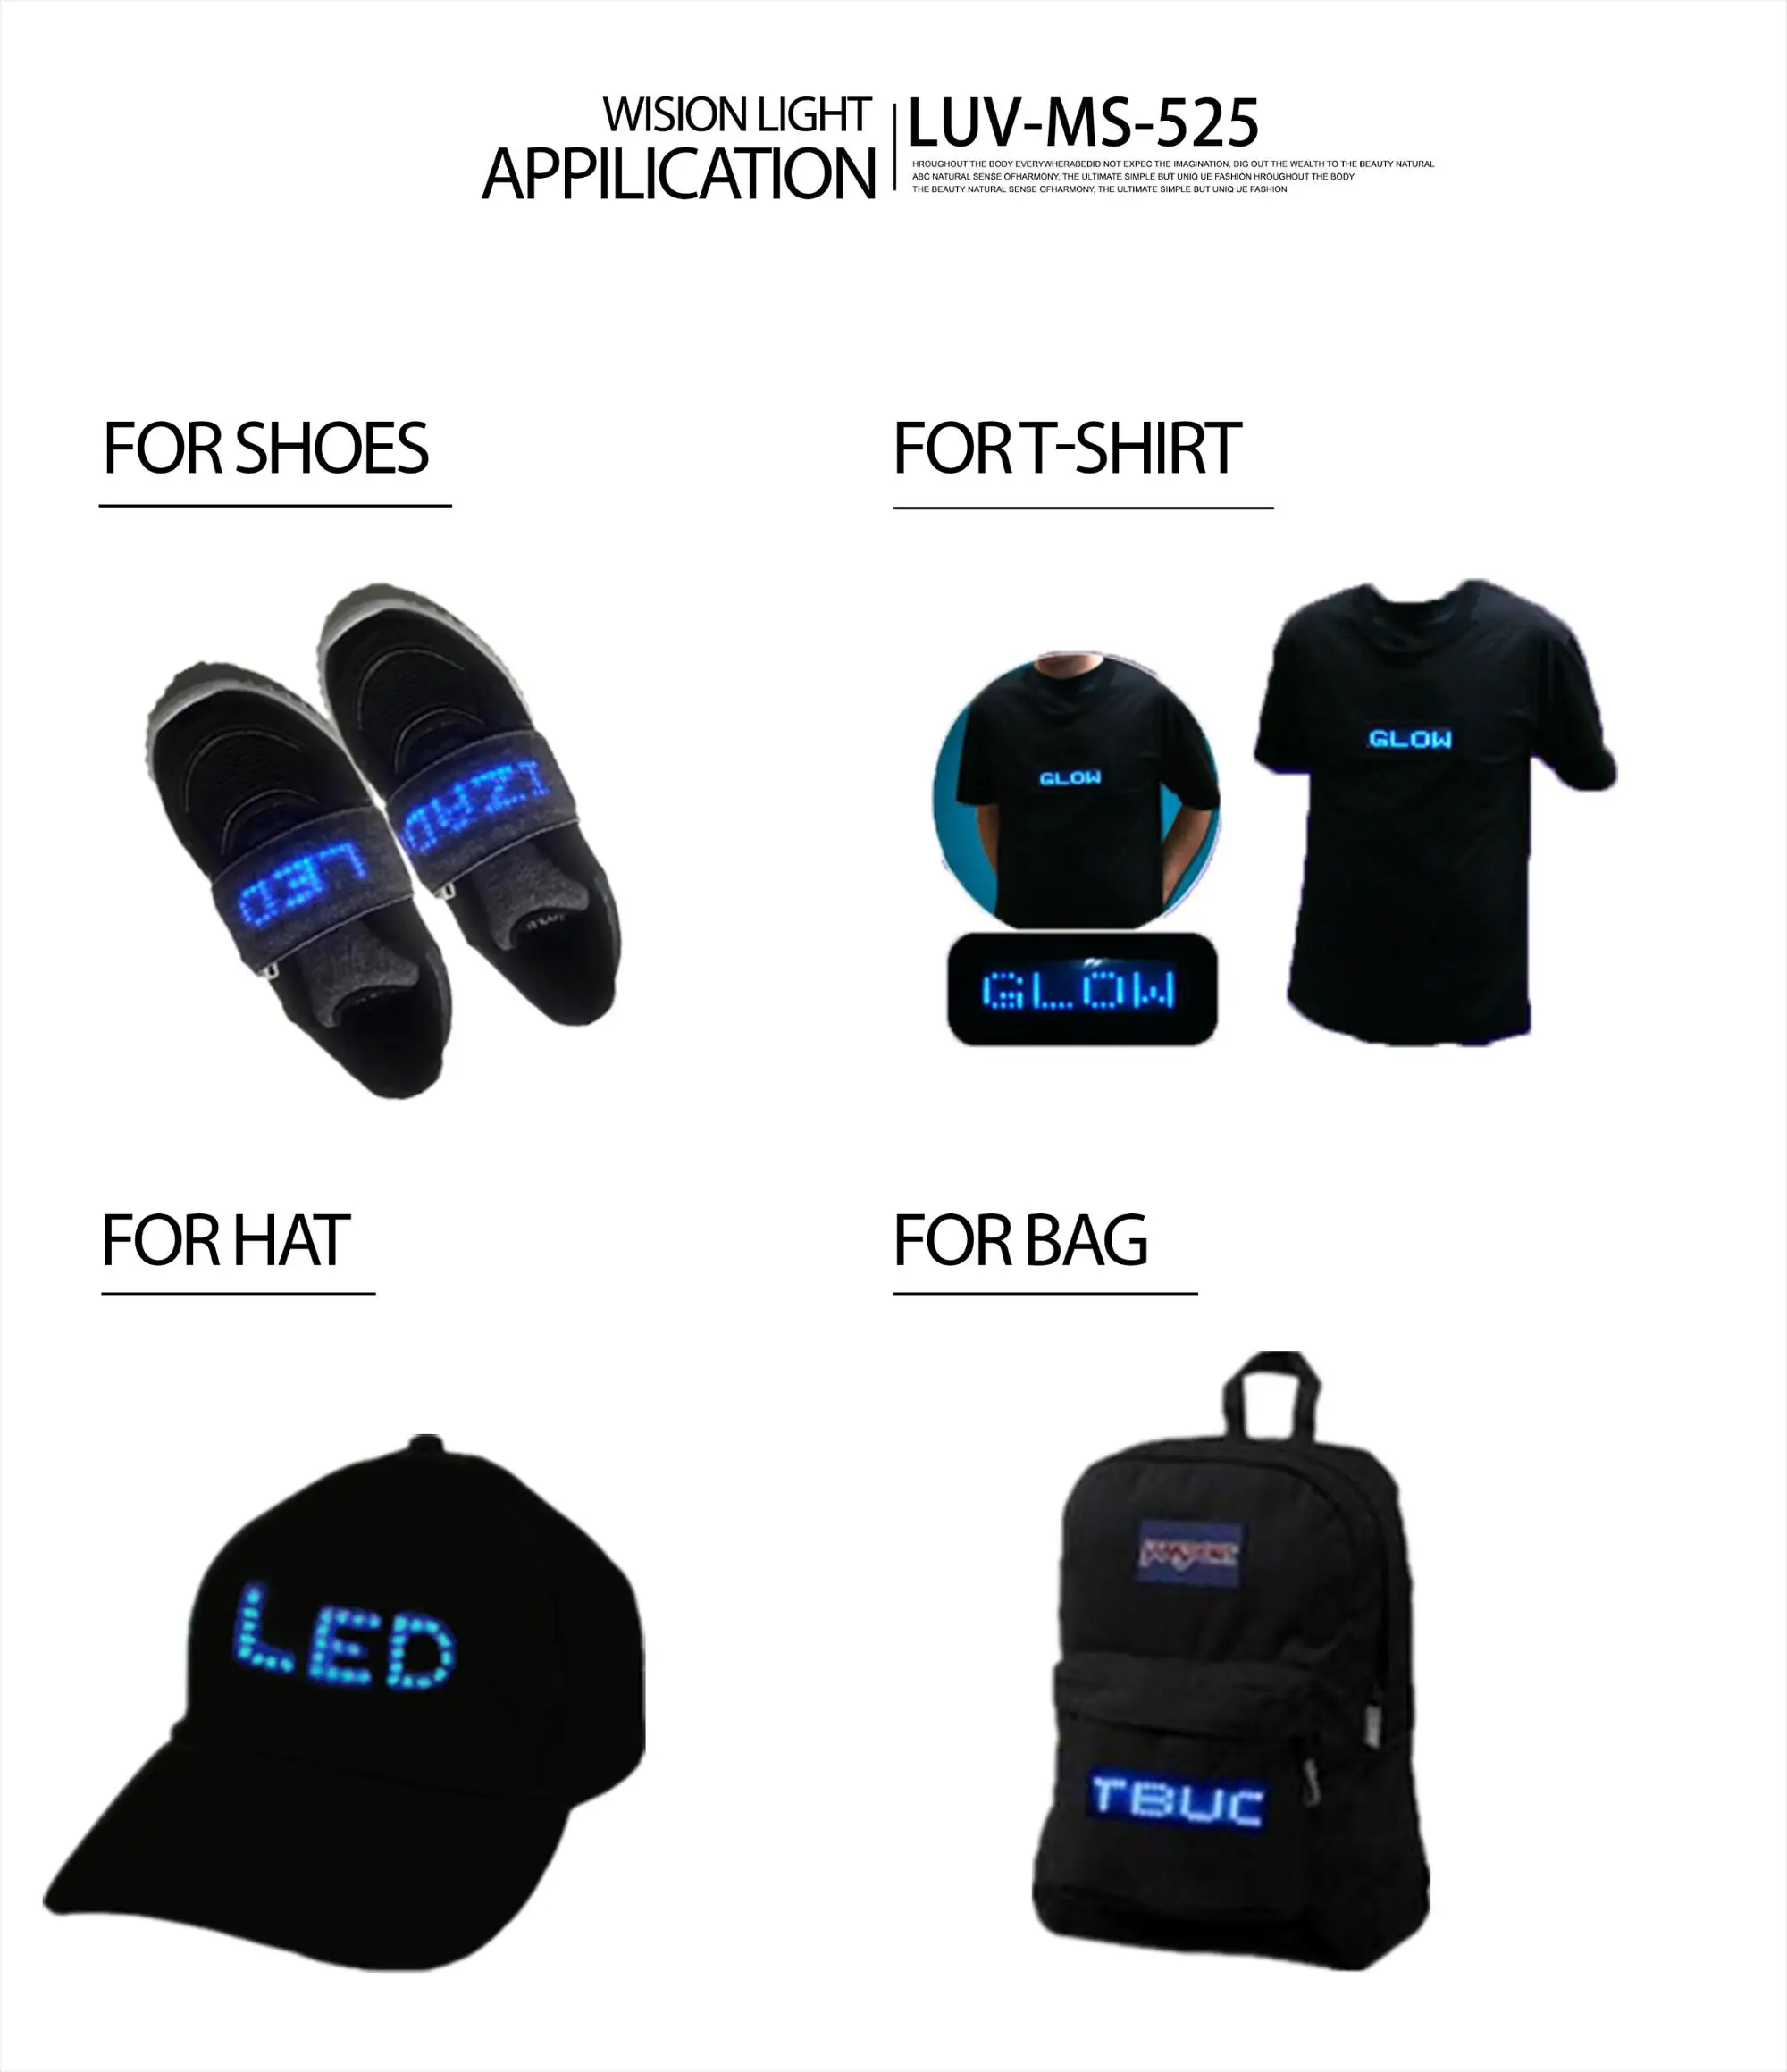 Roblox Id Woman Boy Light Led T Happy Birthday El Flash Shirt Kid Buy Flash Shirt Kids Flash Shirt In Roblox Flash Shirt Id Roblox Product On Alibaba Com - images of shoes roblox ids